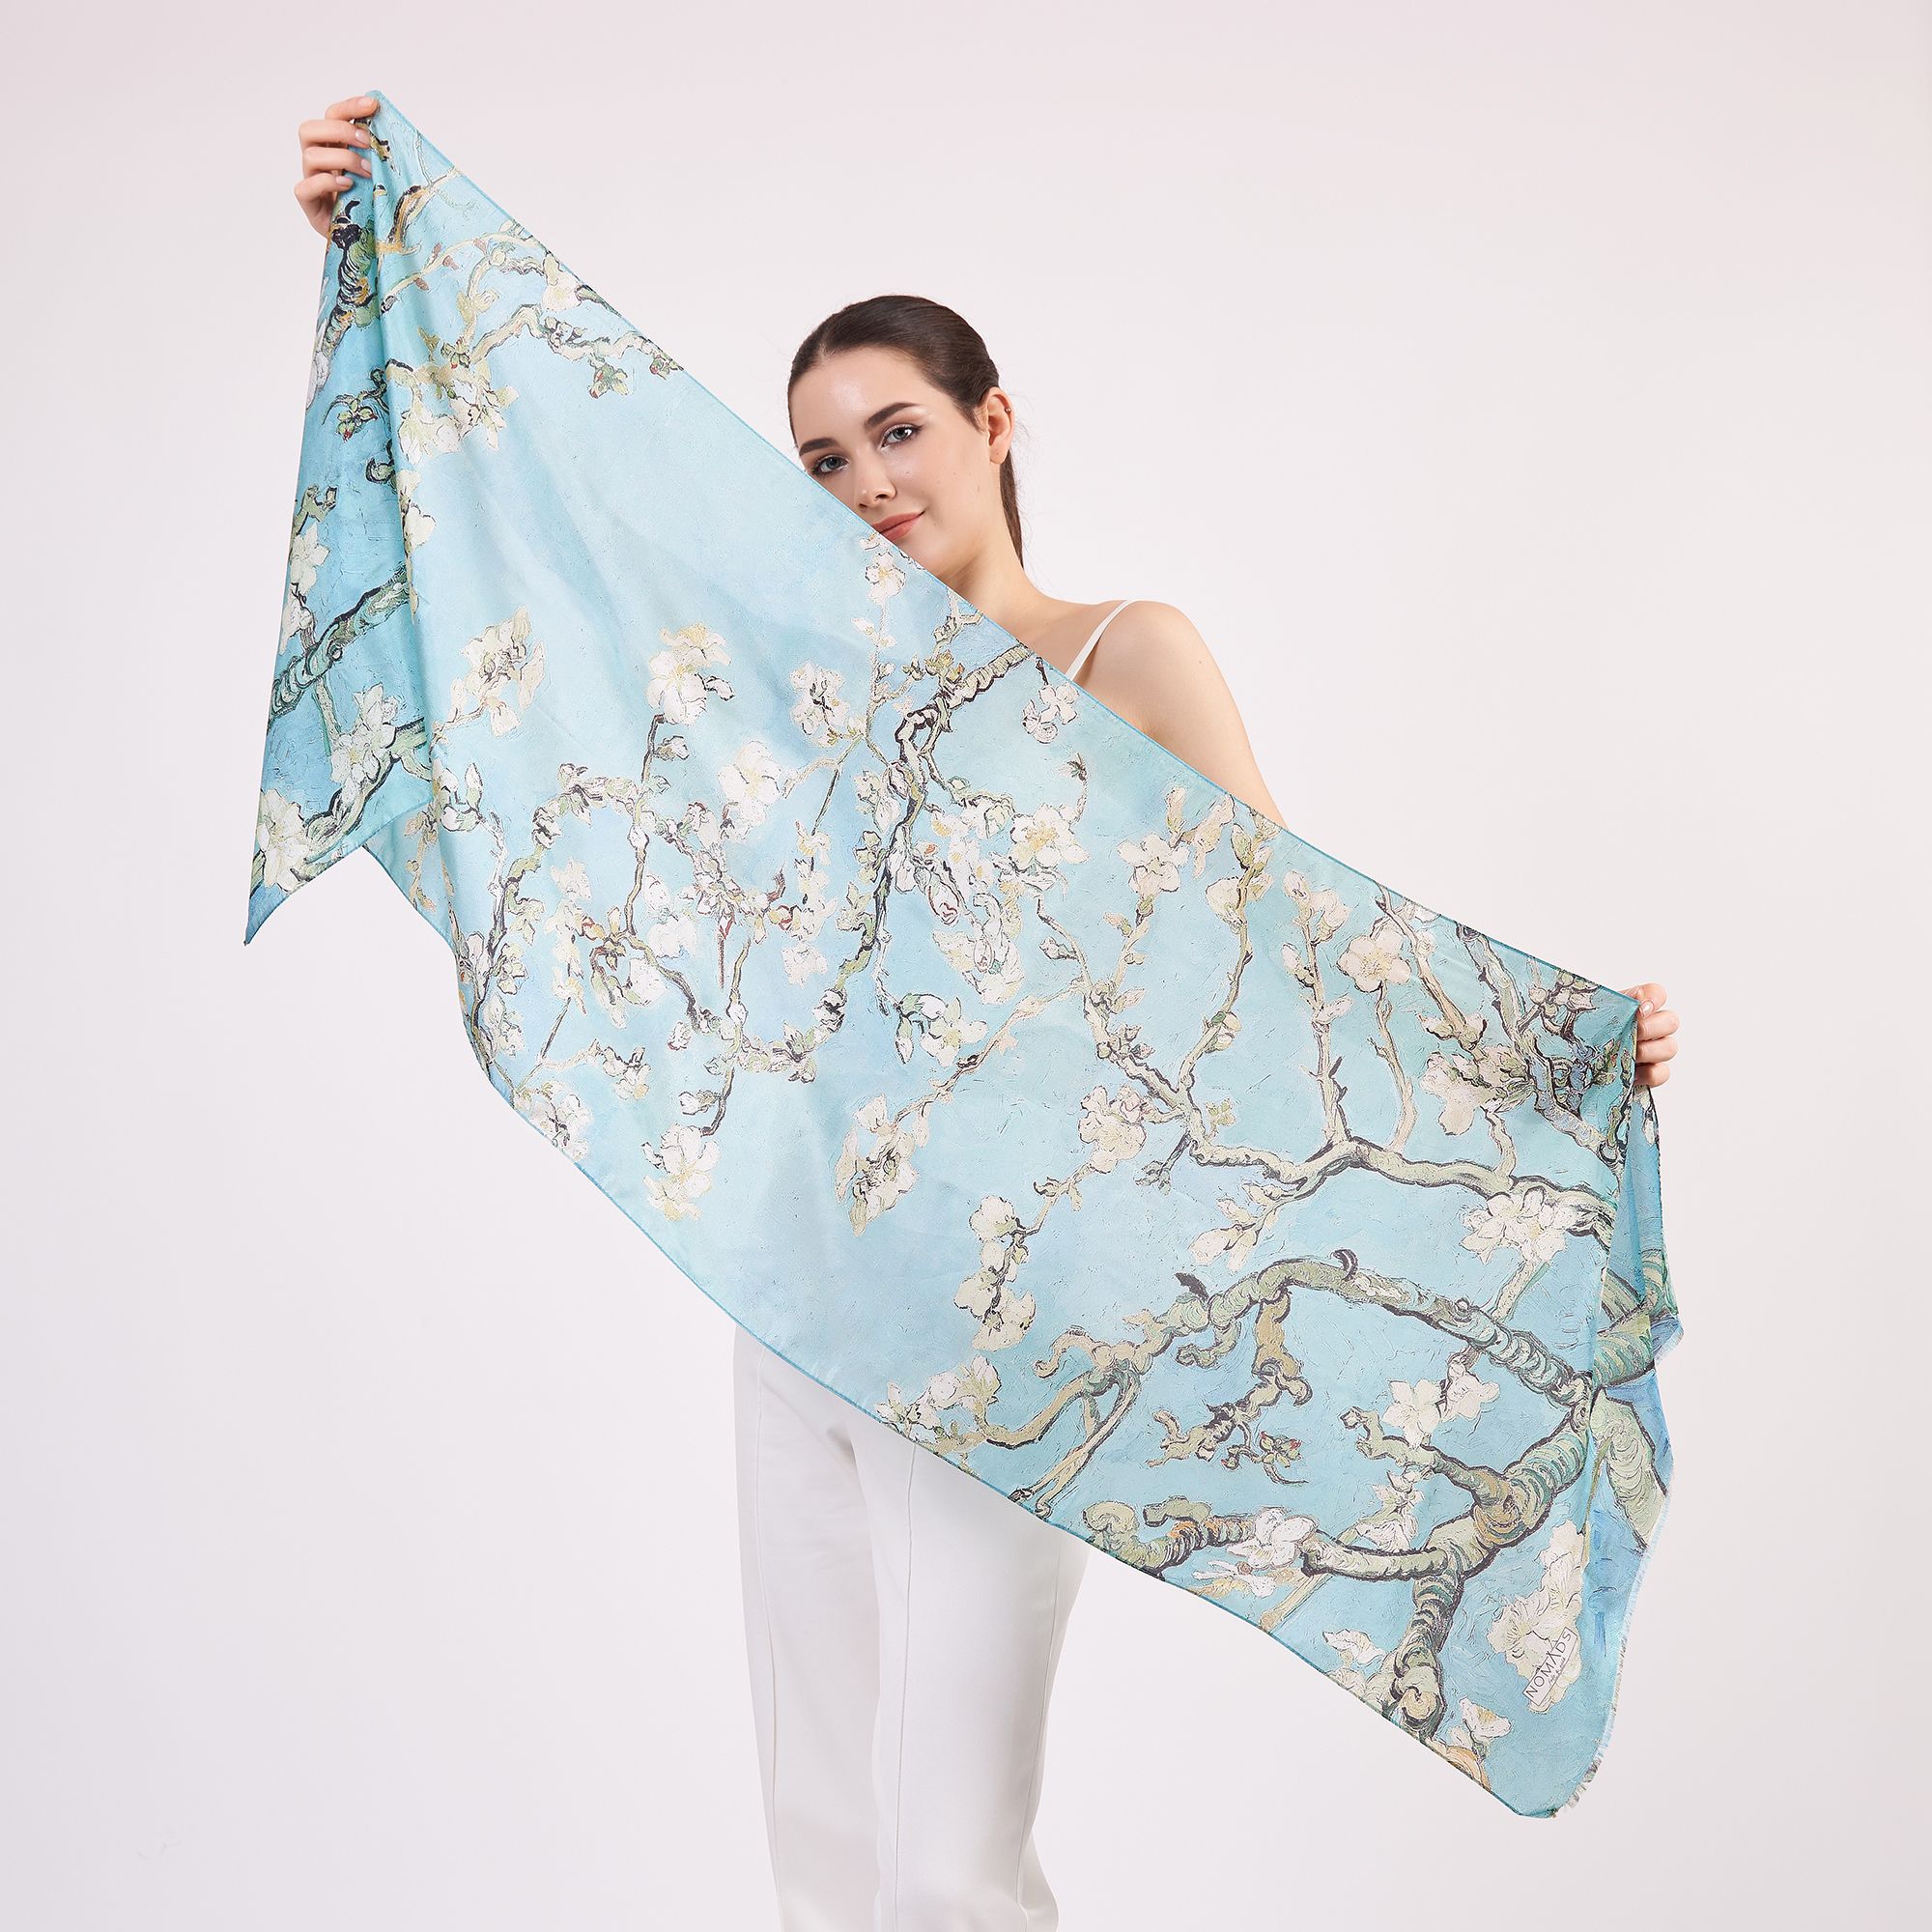 %100 Silk Scarf Wrap | Van Gogh Almond Blossoms Turquoise | 6 Momme Mulberry Silk Headband, Bag Accessory